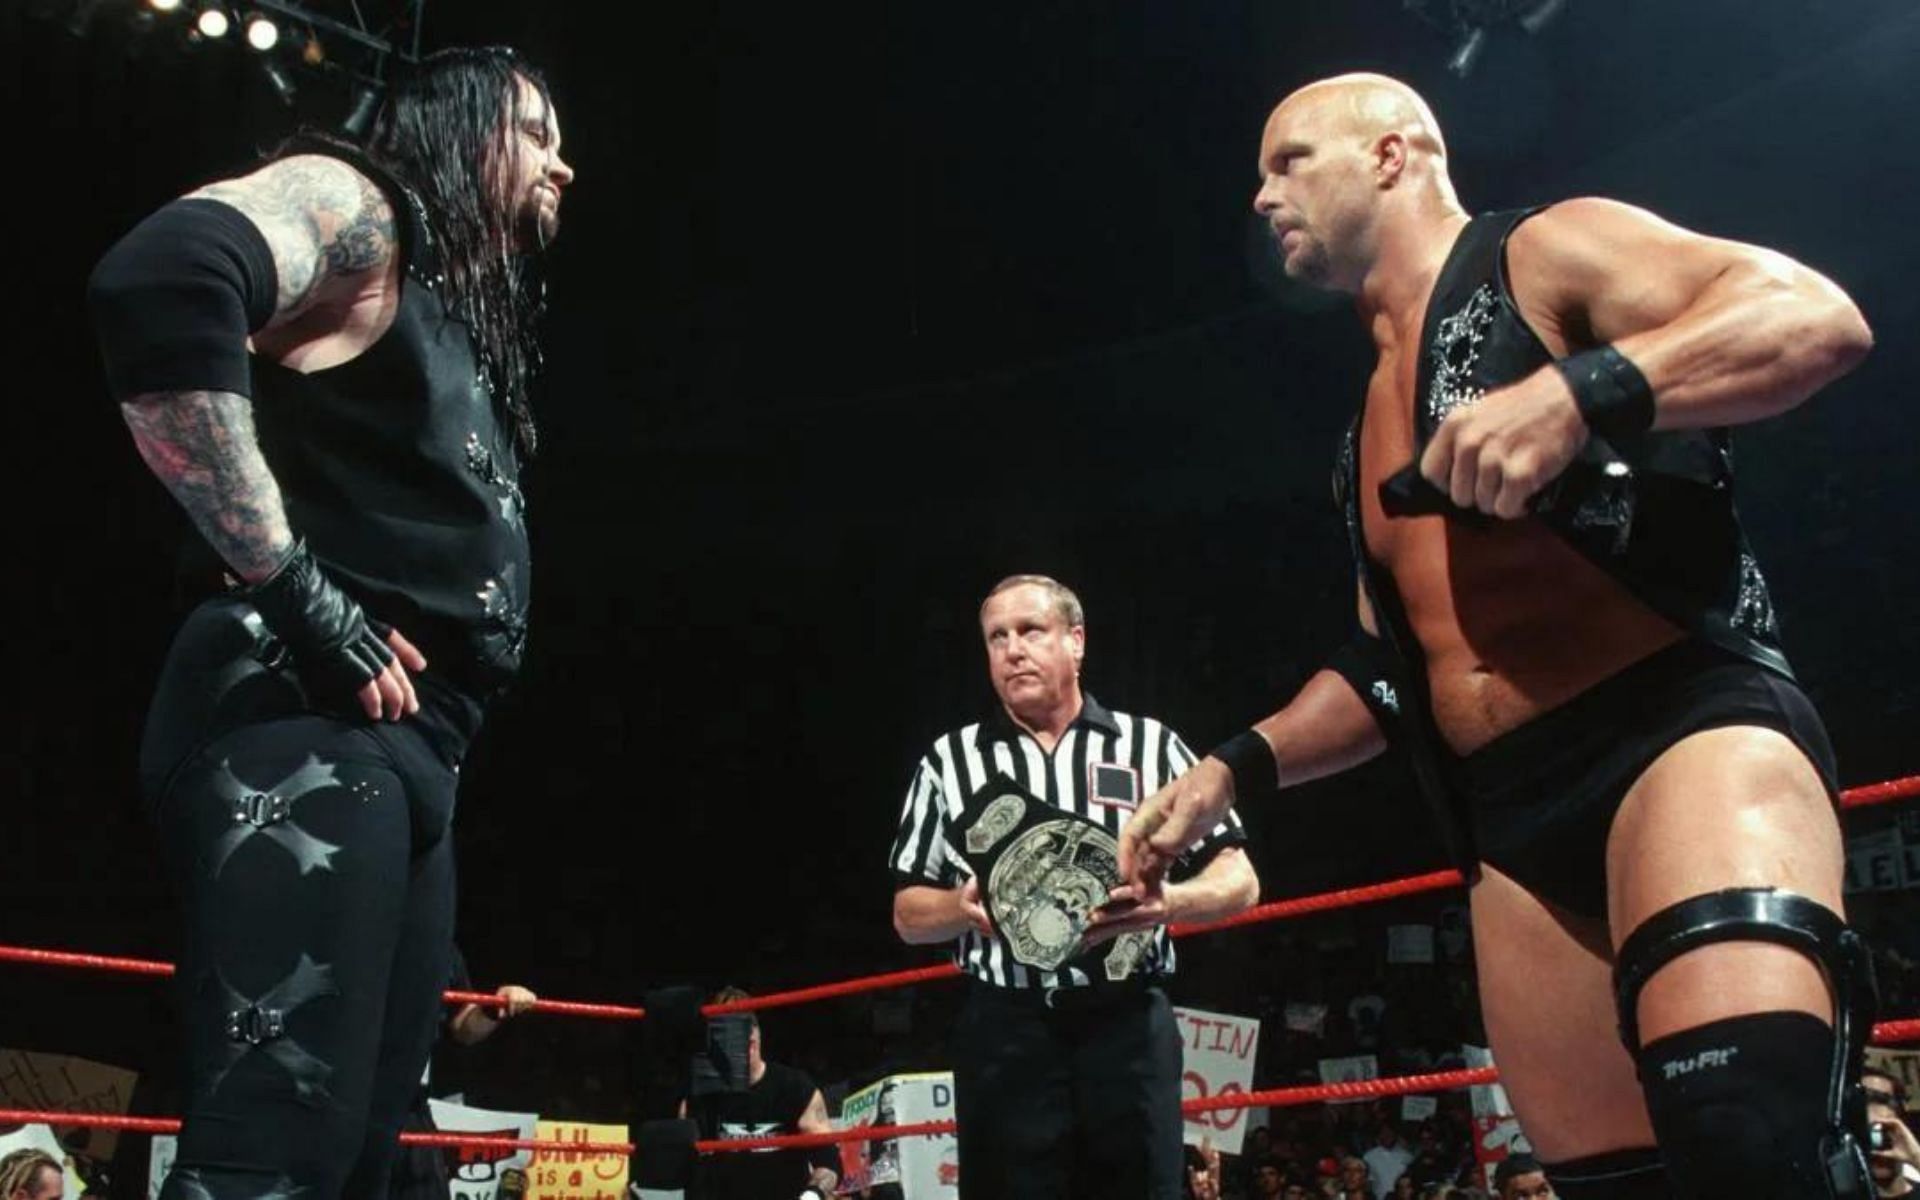 The Rattlesnake took on The Phenom for the WWE title.